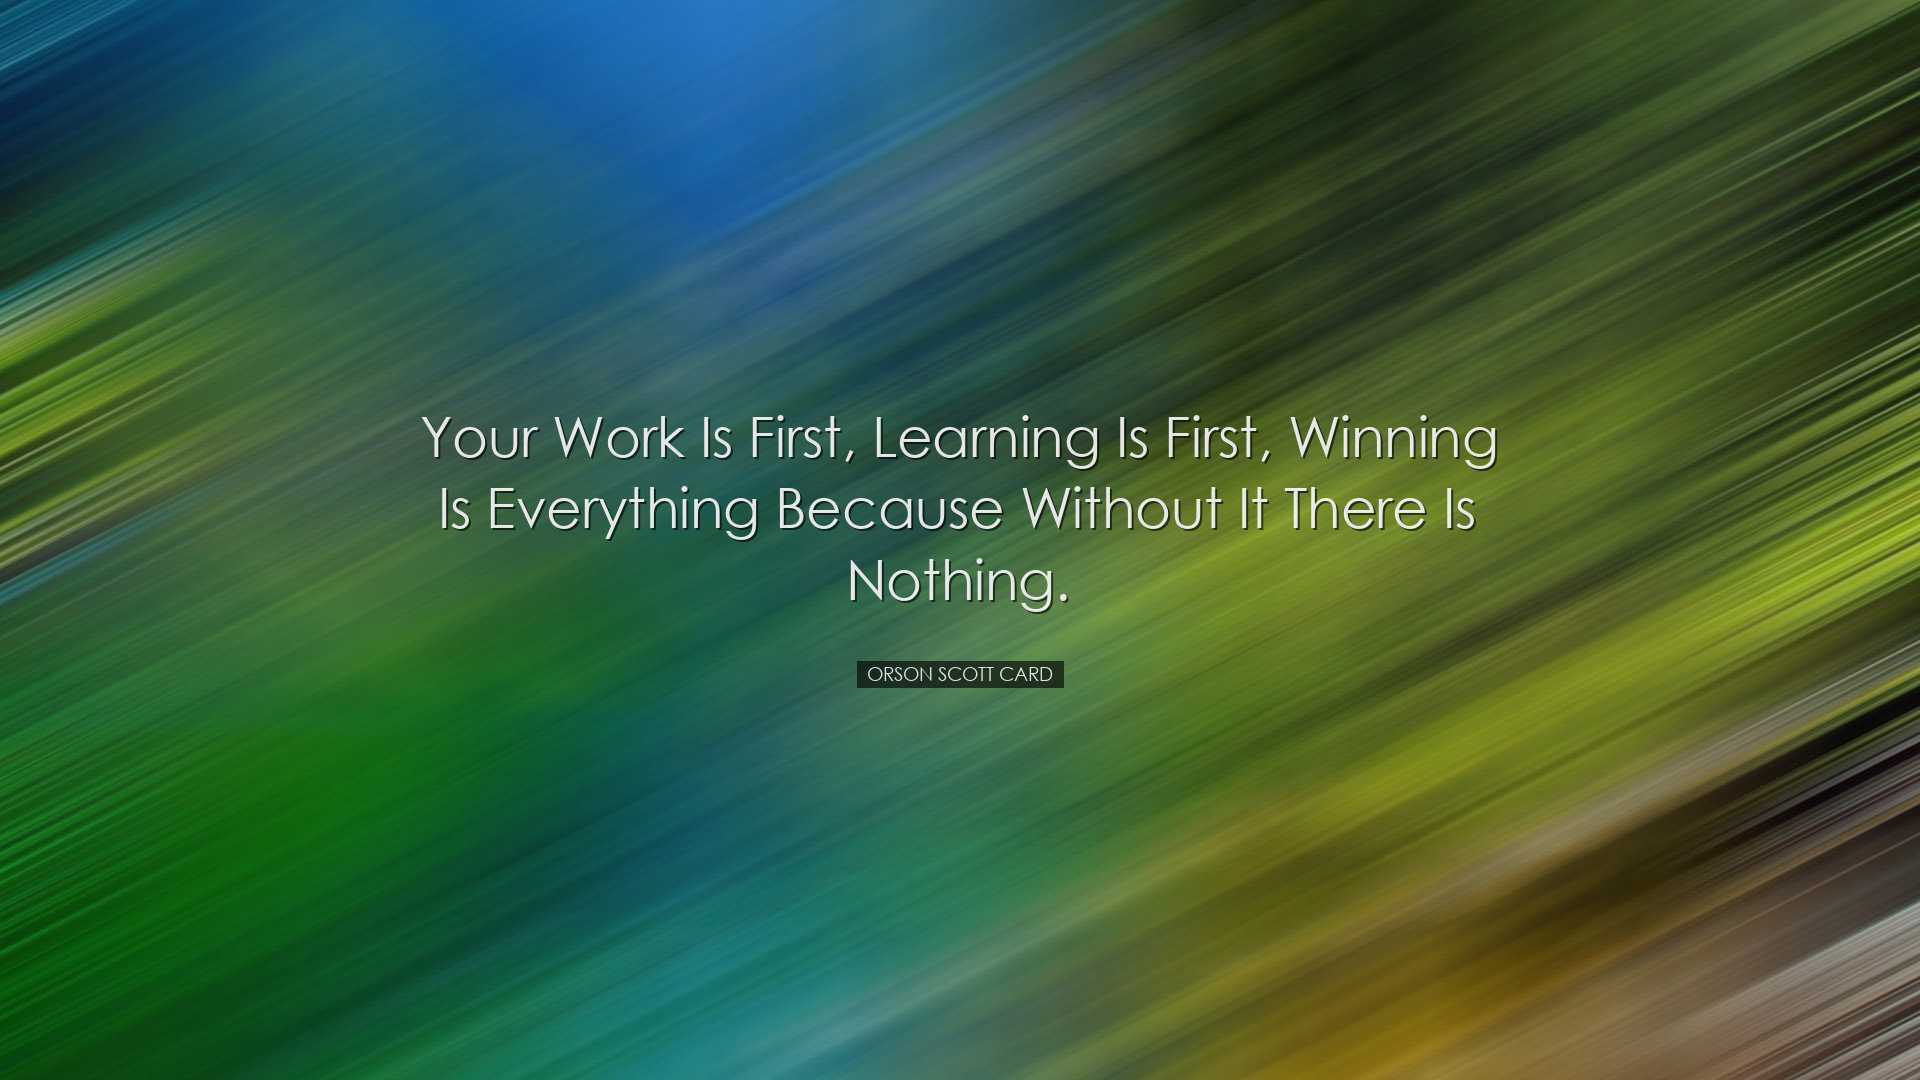 Your work is first, learning is first, winning is everything becau